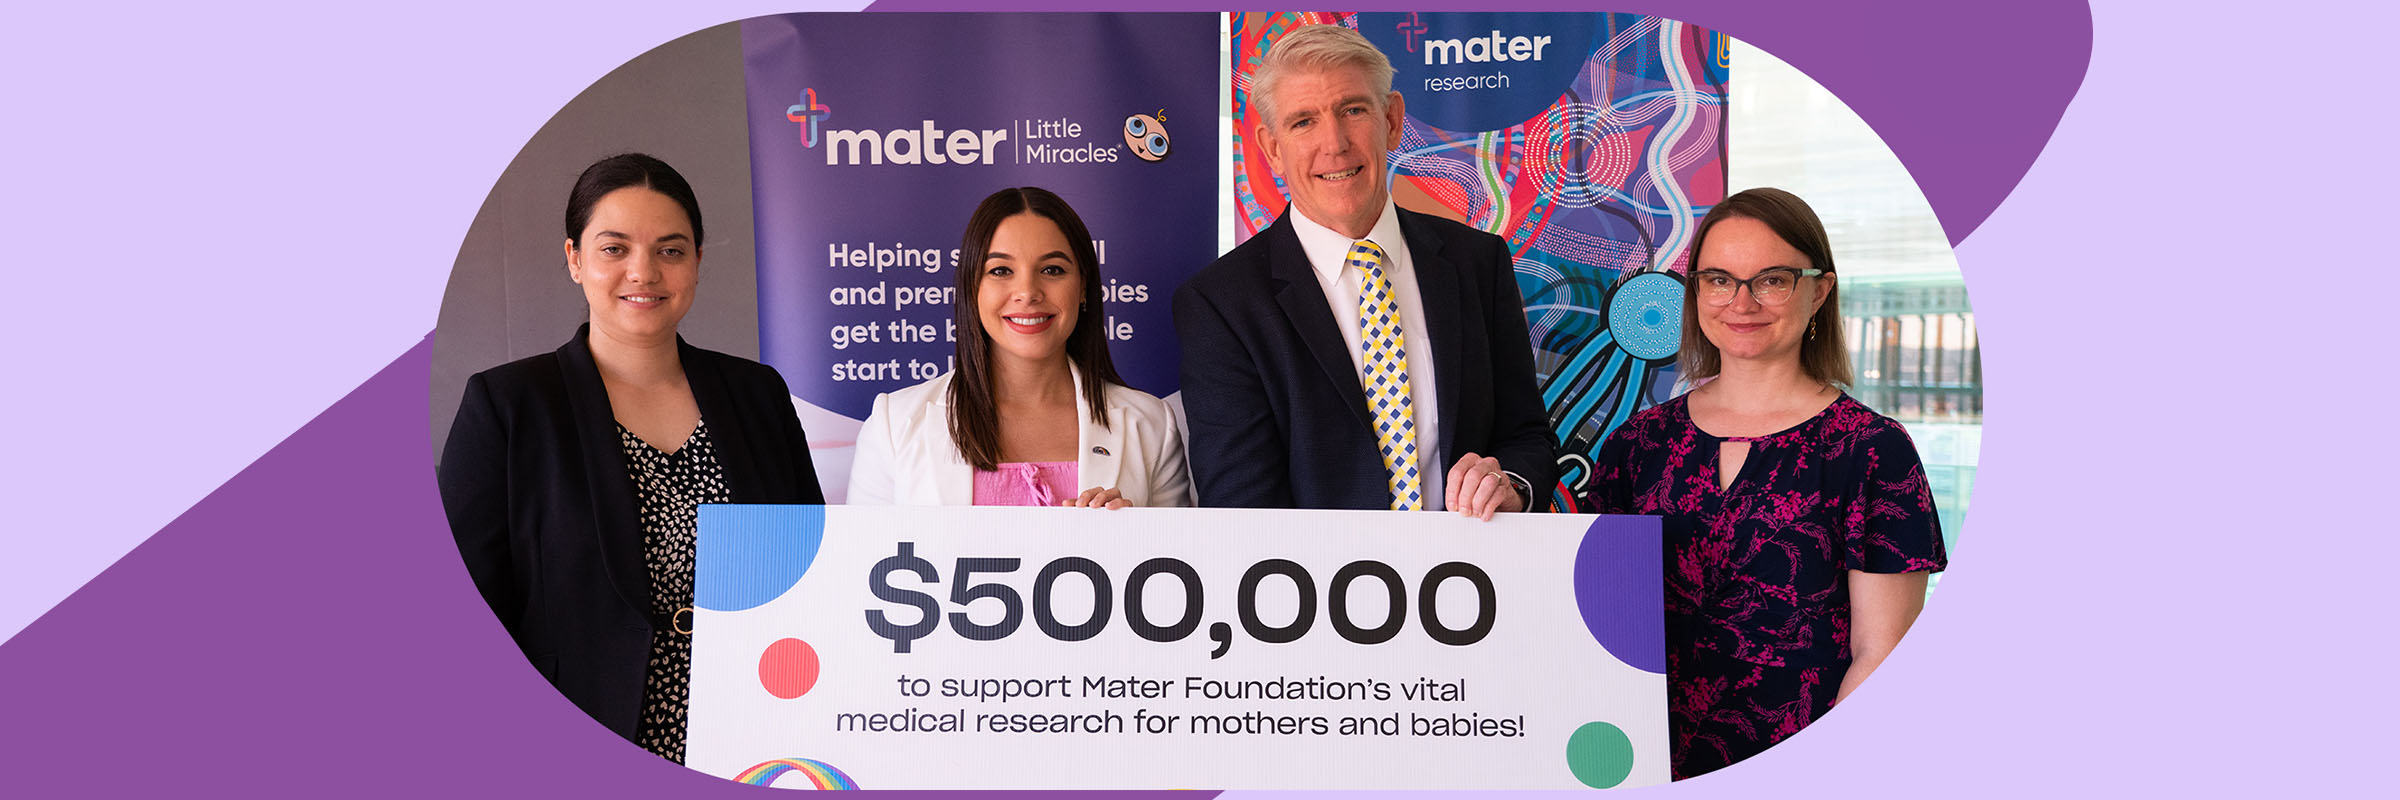 Our $500,000 boost to medical research for mums and bubs Hero Image